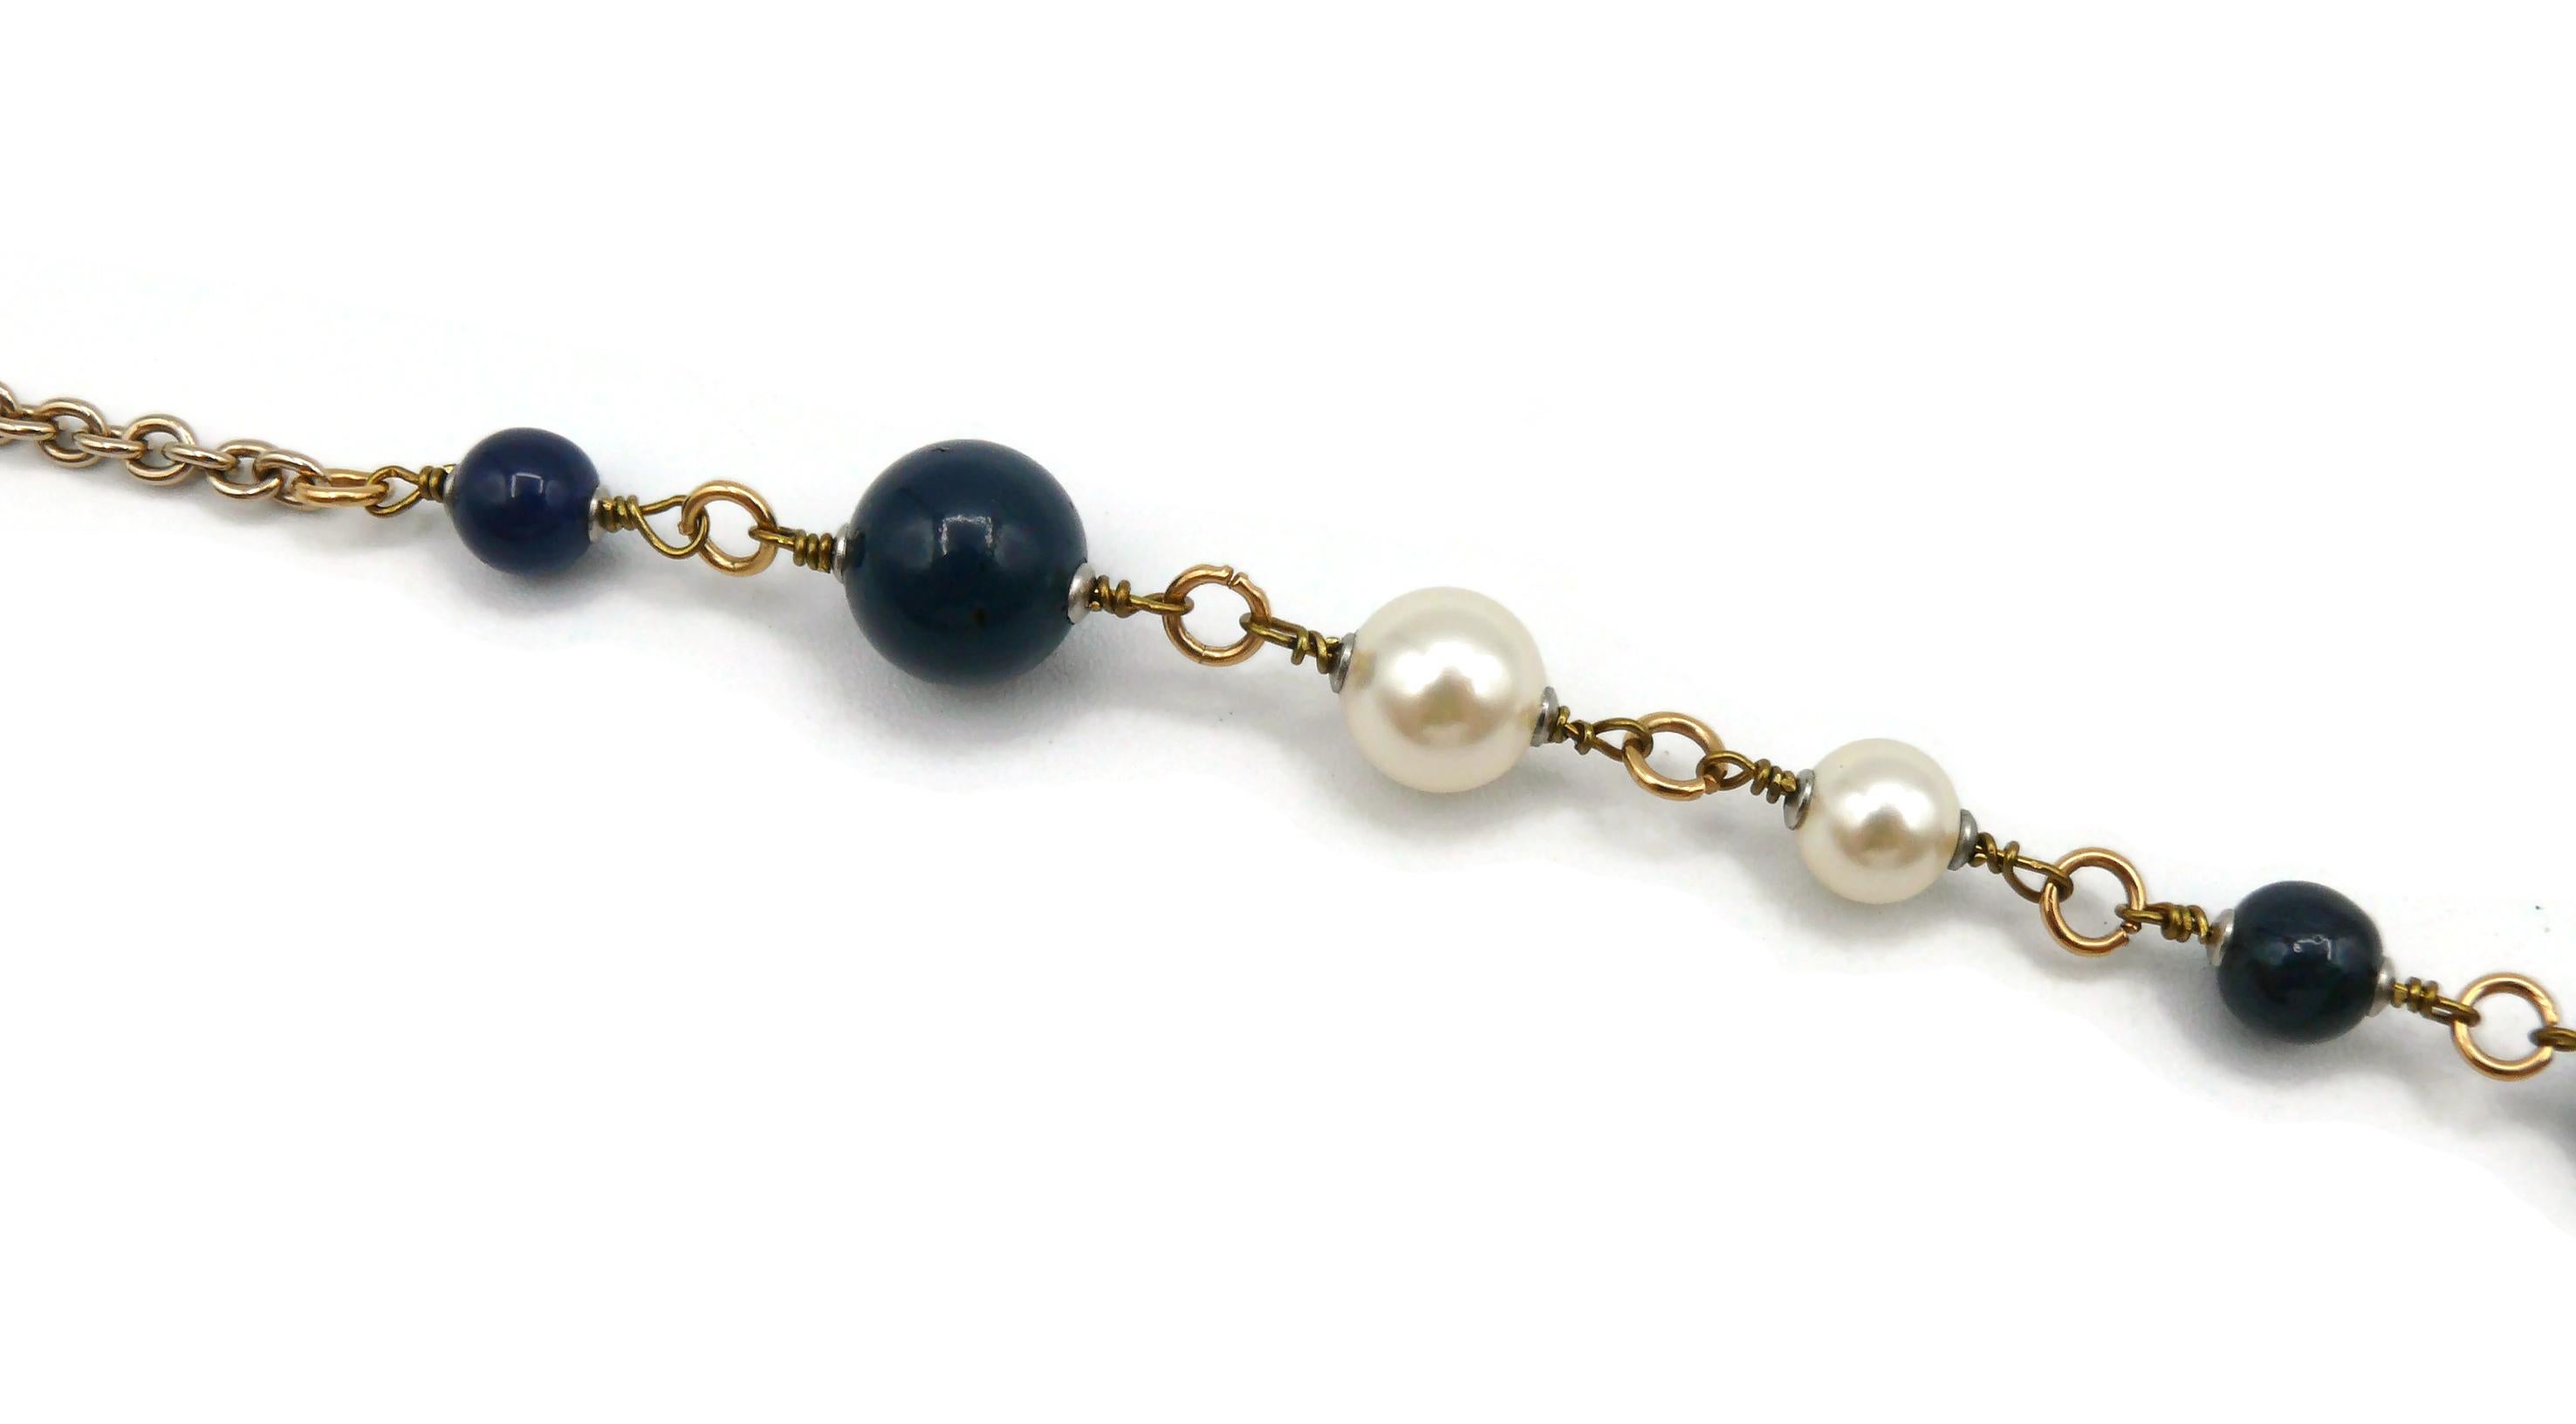 CHANEL CC Logos Faux Pearls, Black & Blue Resin Beads Necklace, 2016 1